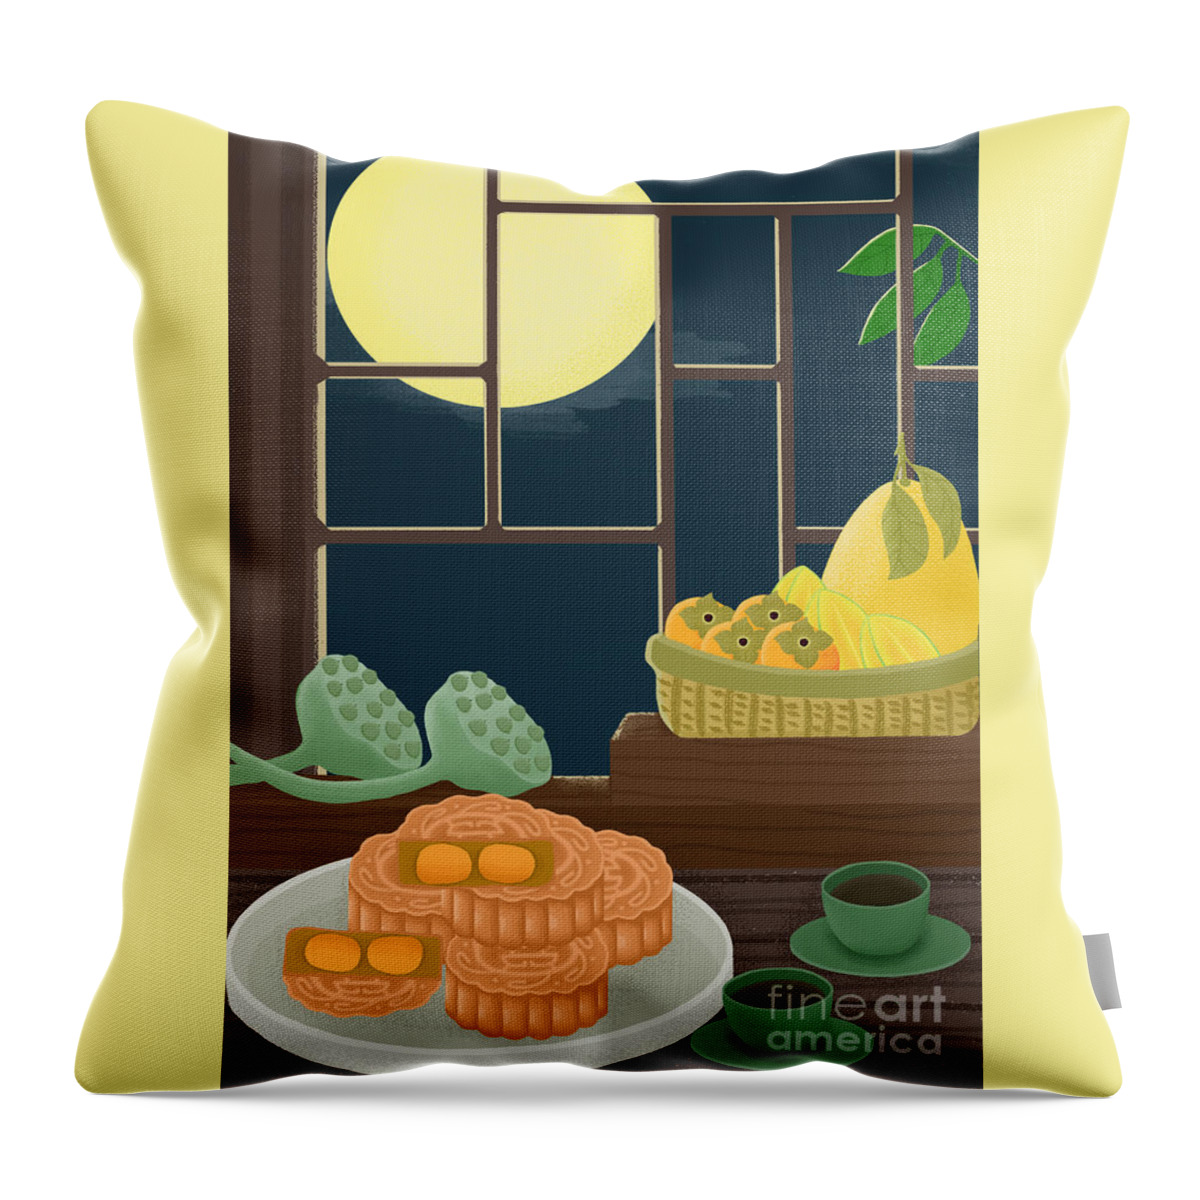 Moon Cakes Throw Pillow featuring the drawing Mid-Autumn Festival Moon Cake Illustration by Min Fen Zhu